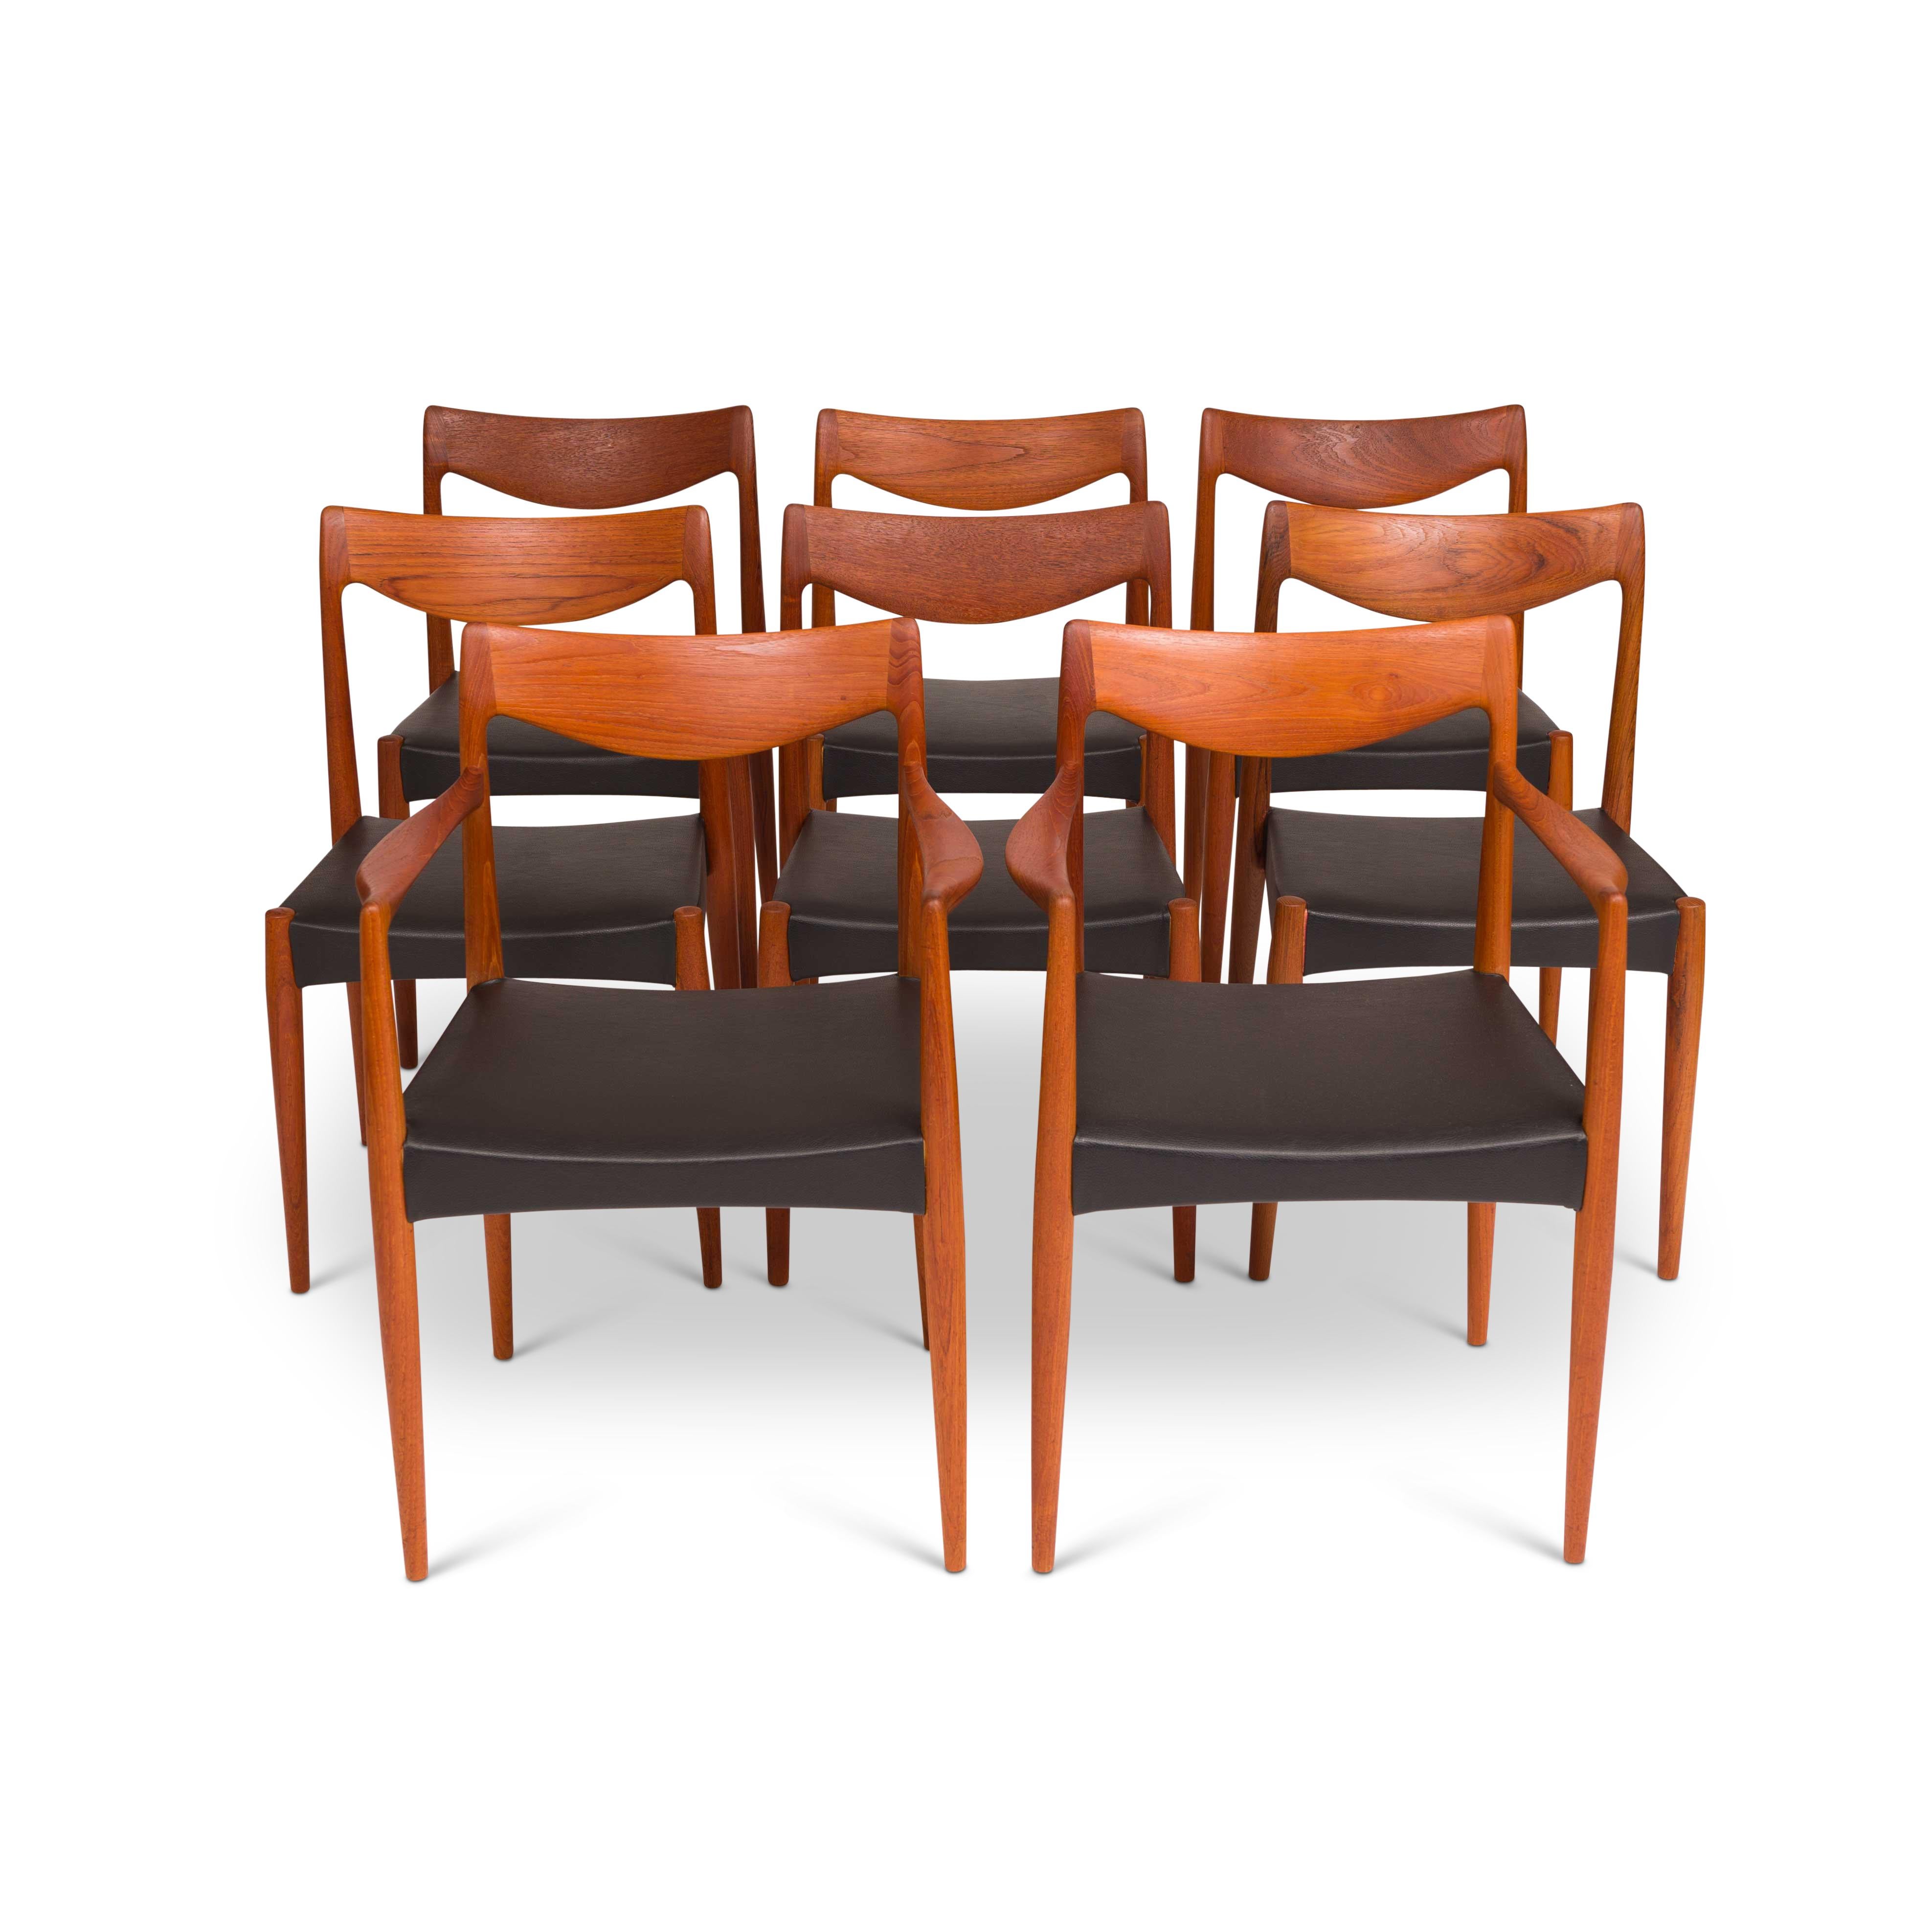 This remarkable collection features eight iconic Mid-Century Modern Danish teak Gustav Bahus Bambi dining chairs skillfully crafted by Rolf Rastad and Adolf Relling in the 1960s. Rolf Rastad and Adolf Relling were influential Norwegian furniture